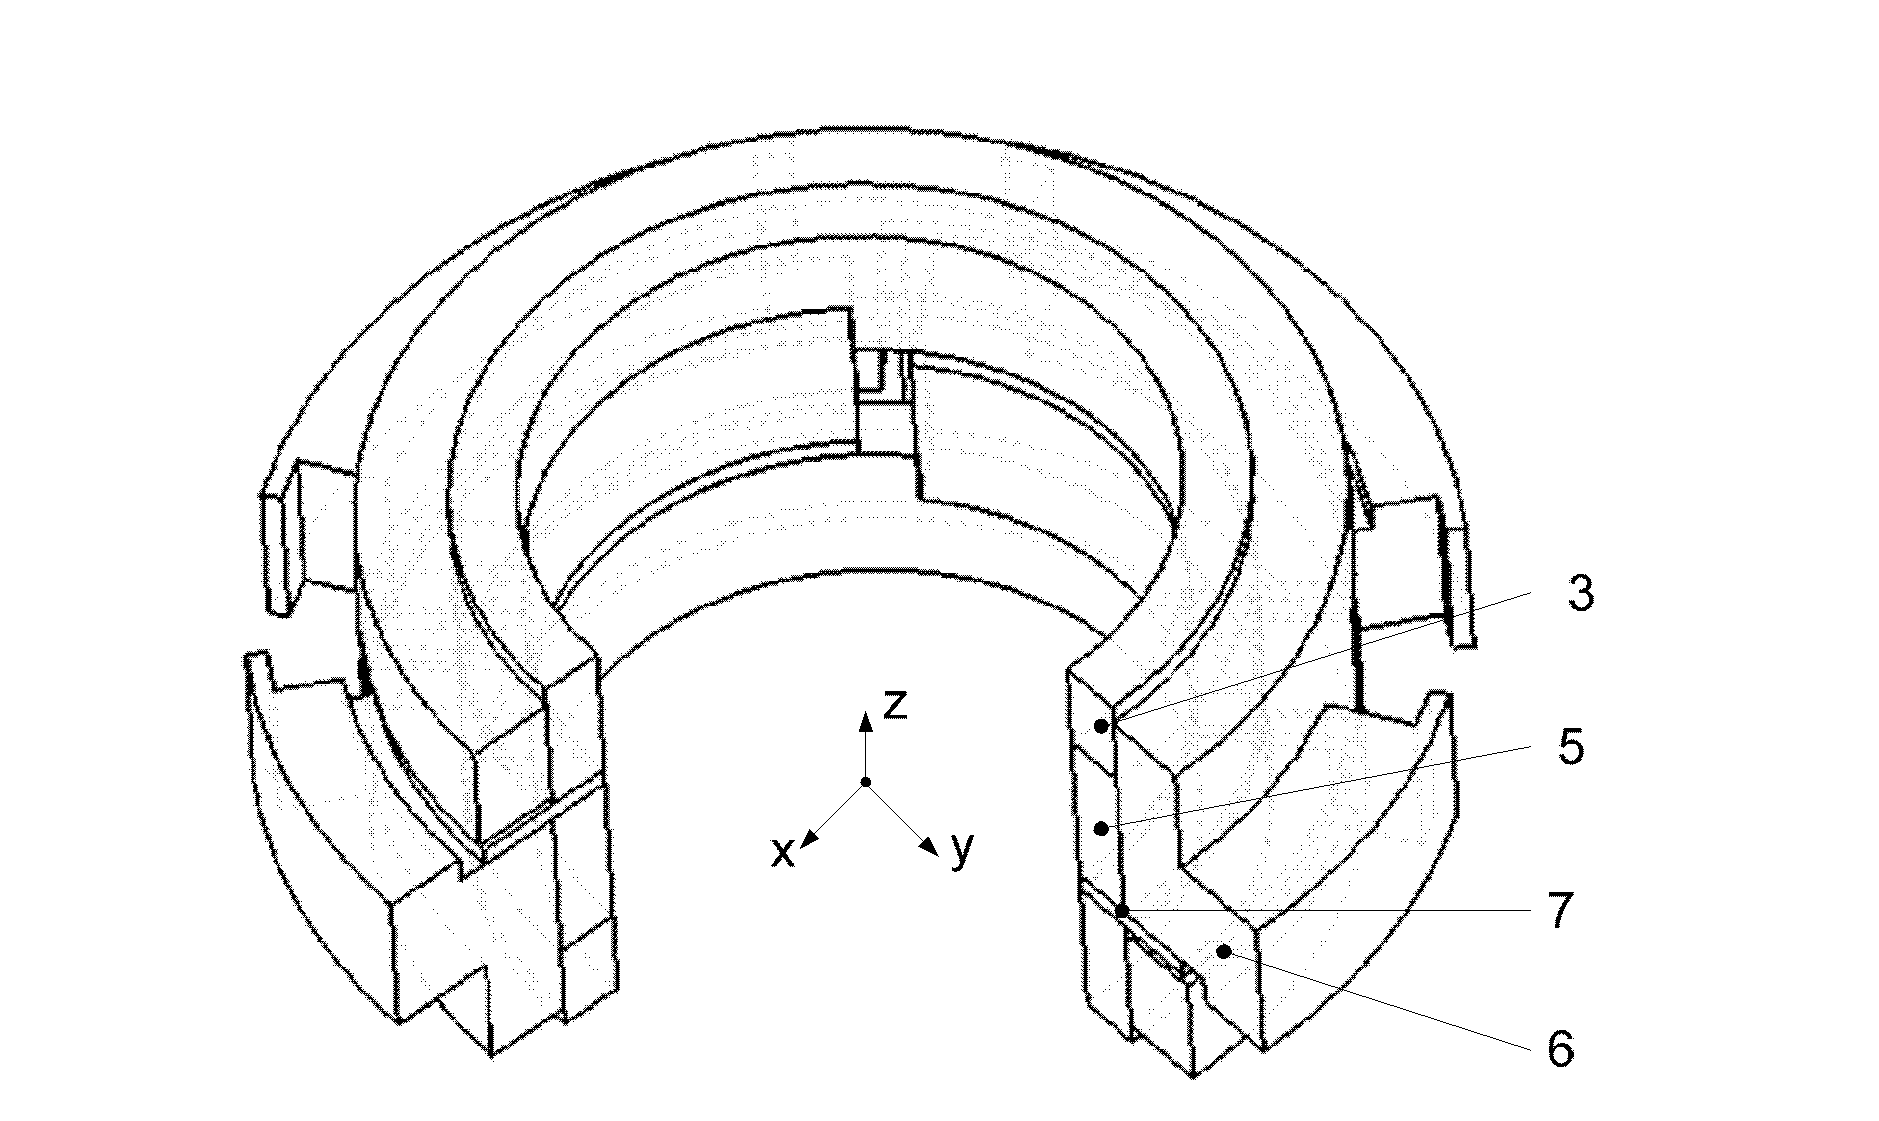 Radial decoupling taper magnetic bearing with three degree of freedom